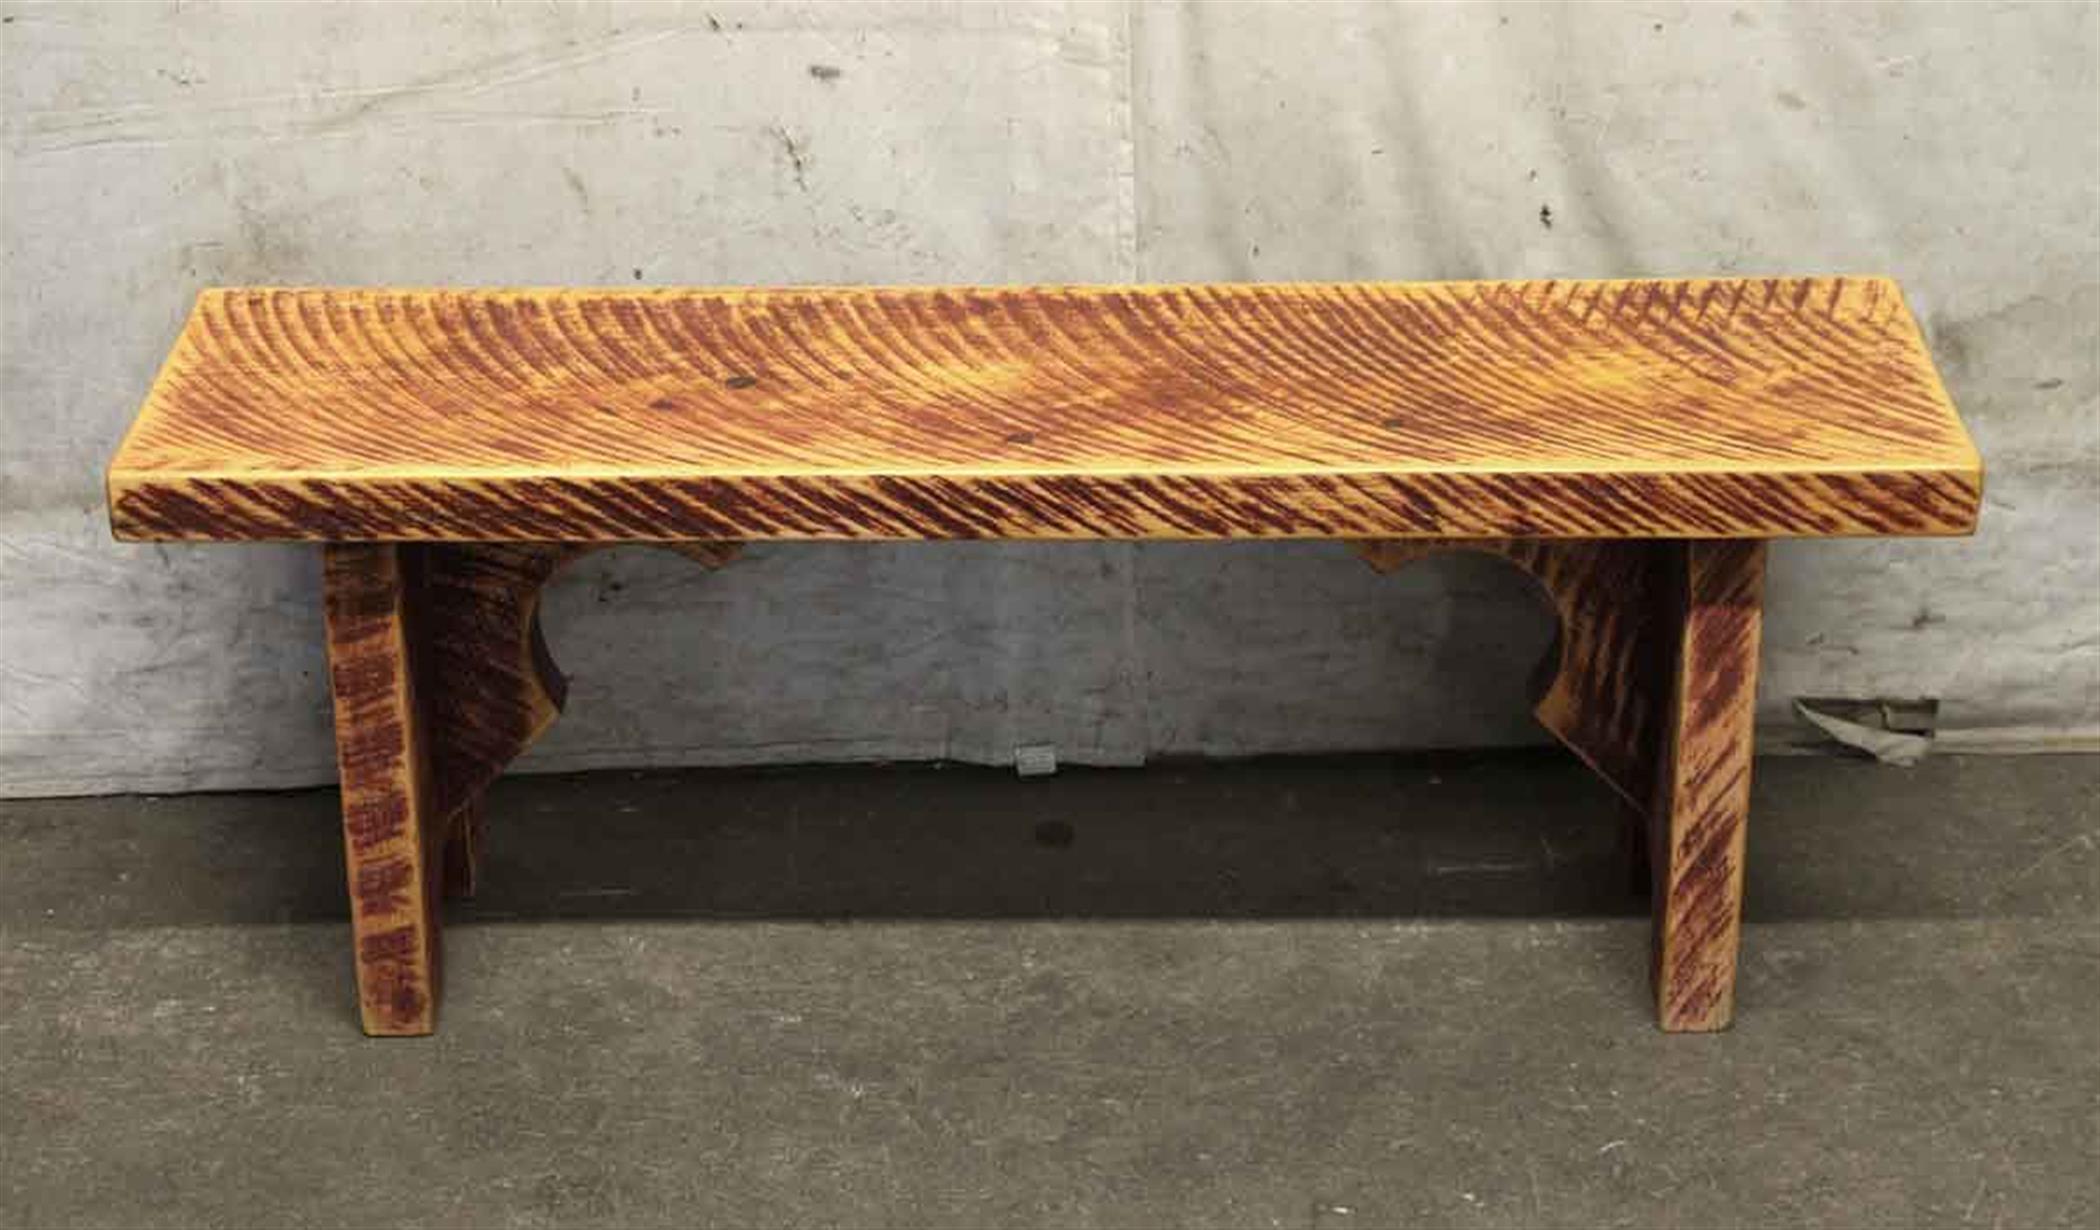 1990s pine bench with a unique stripe-like finish caused by the saw blades rotating at the saw mill. The bench is both a mixture of light and dark wood tones. This can be seen at our 302 Bowery location in Manhattan.